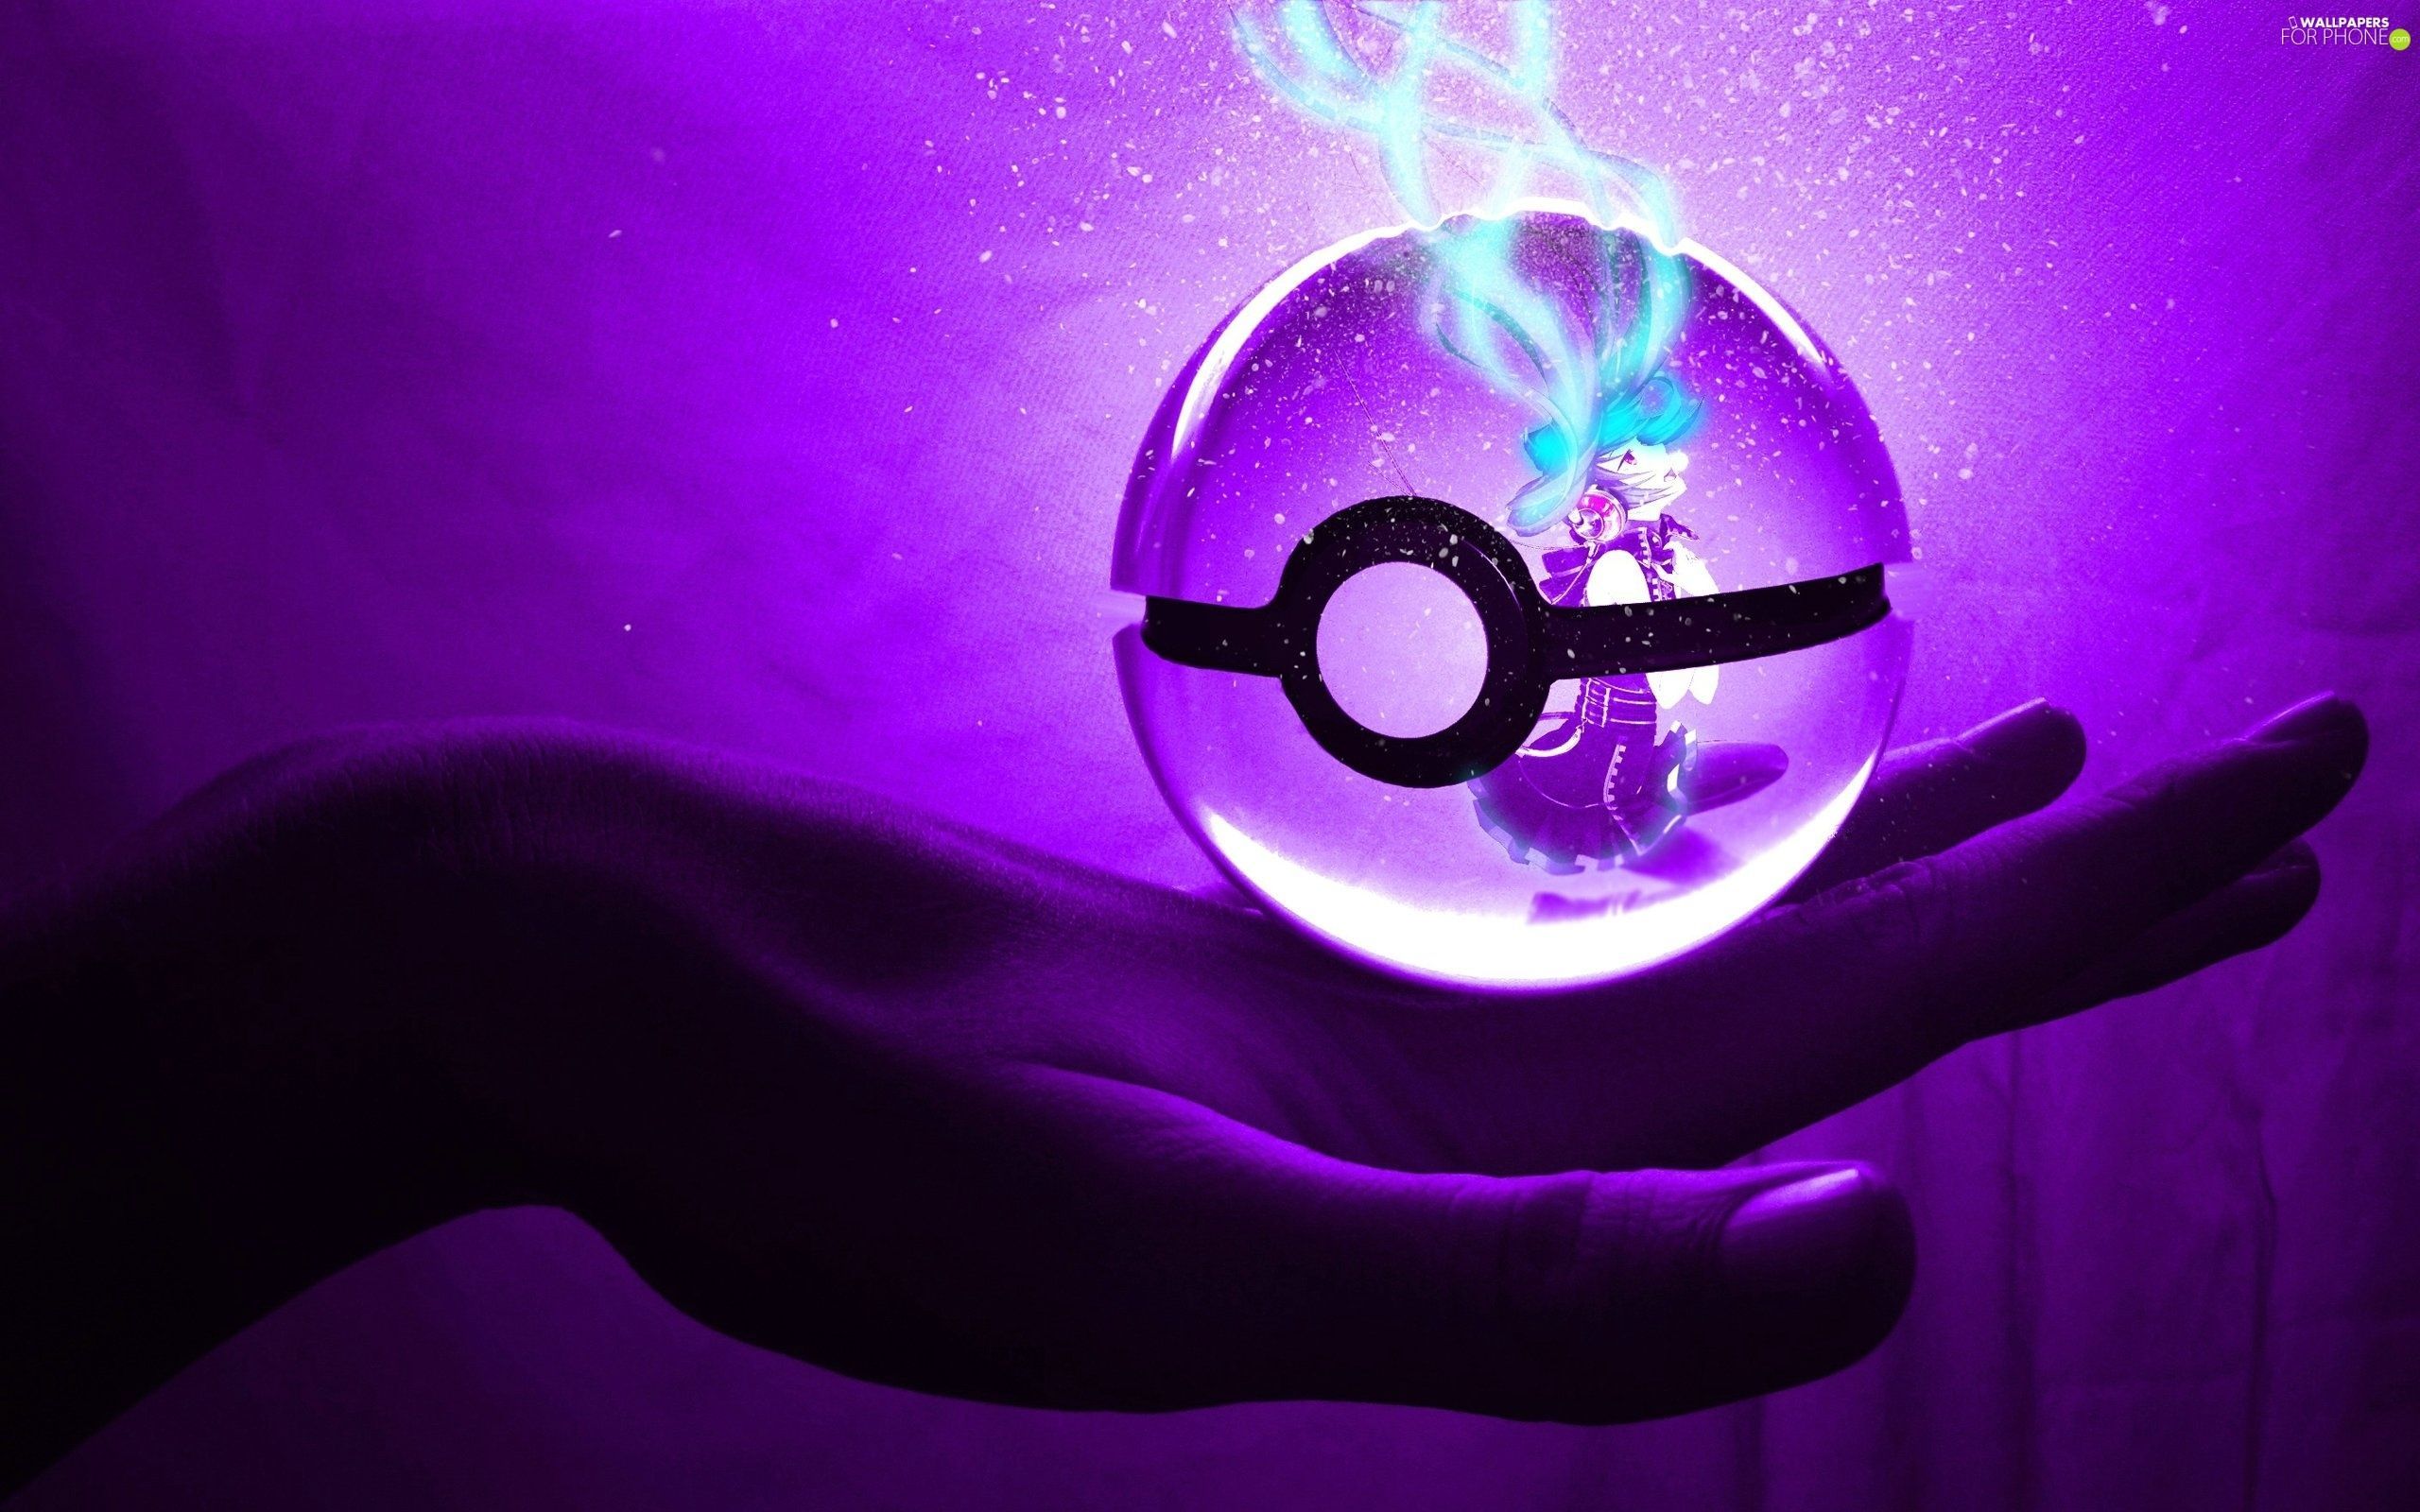 3D, purple, Orb, Pokemon - For phone wallpapers: 2560x1600